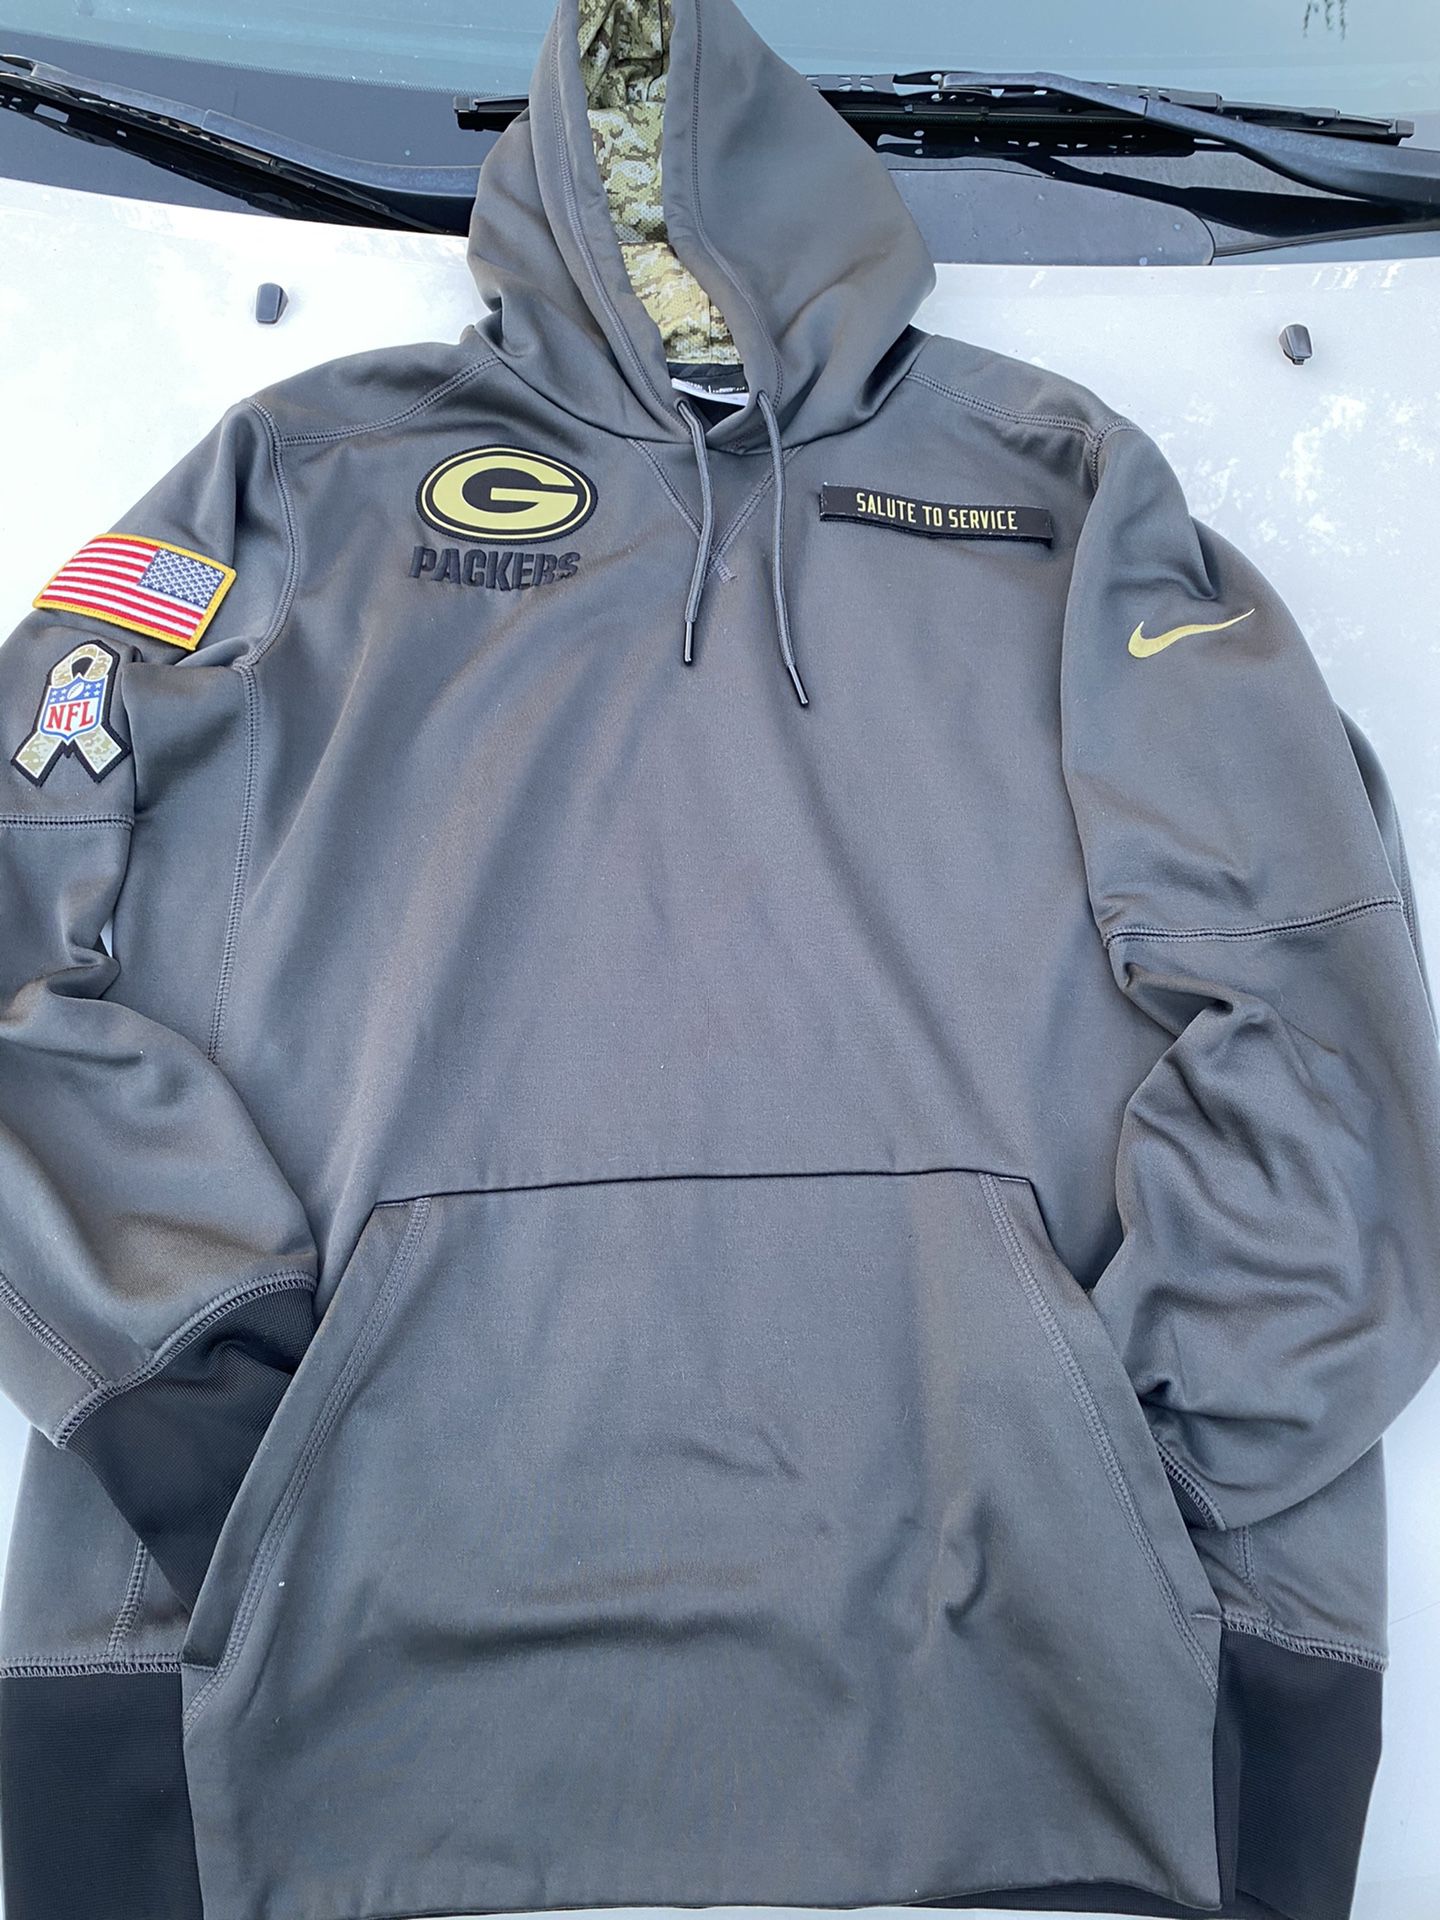 Green Bay packers Nike salute to service NFL Hoodie/ men.. Not Free